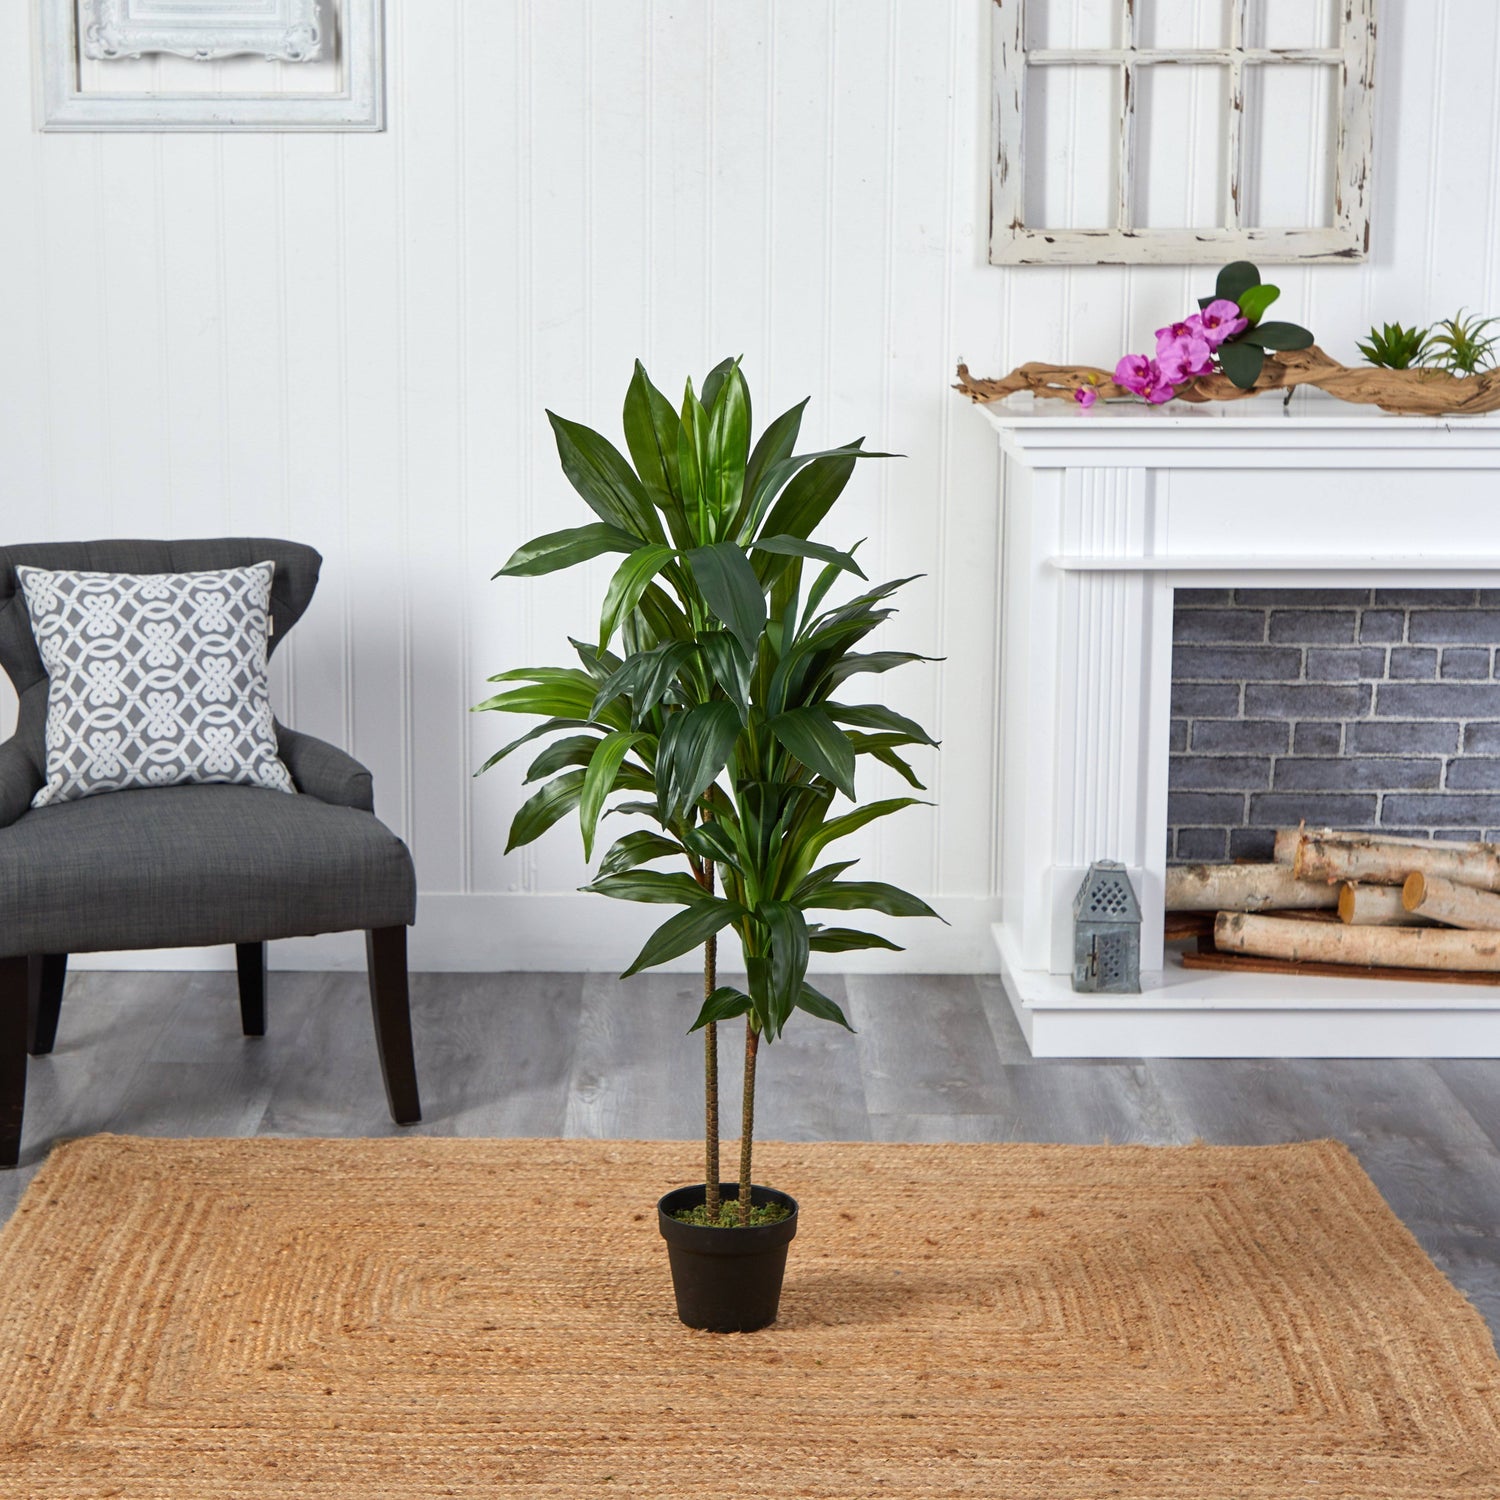 48" Dracaena Silk Plant (Real Touch)